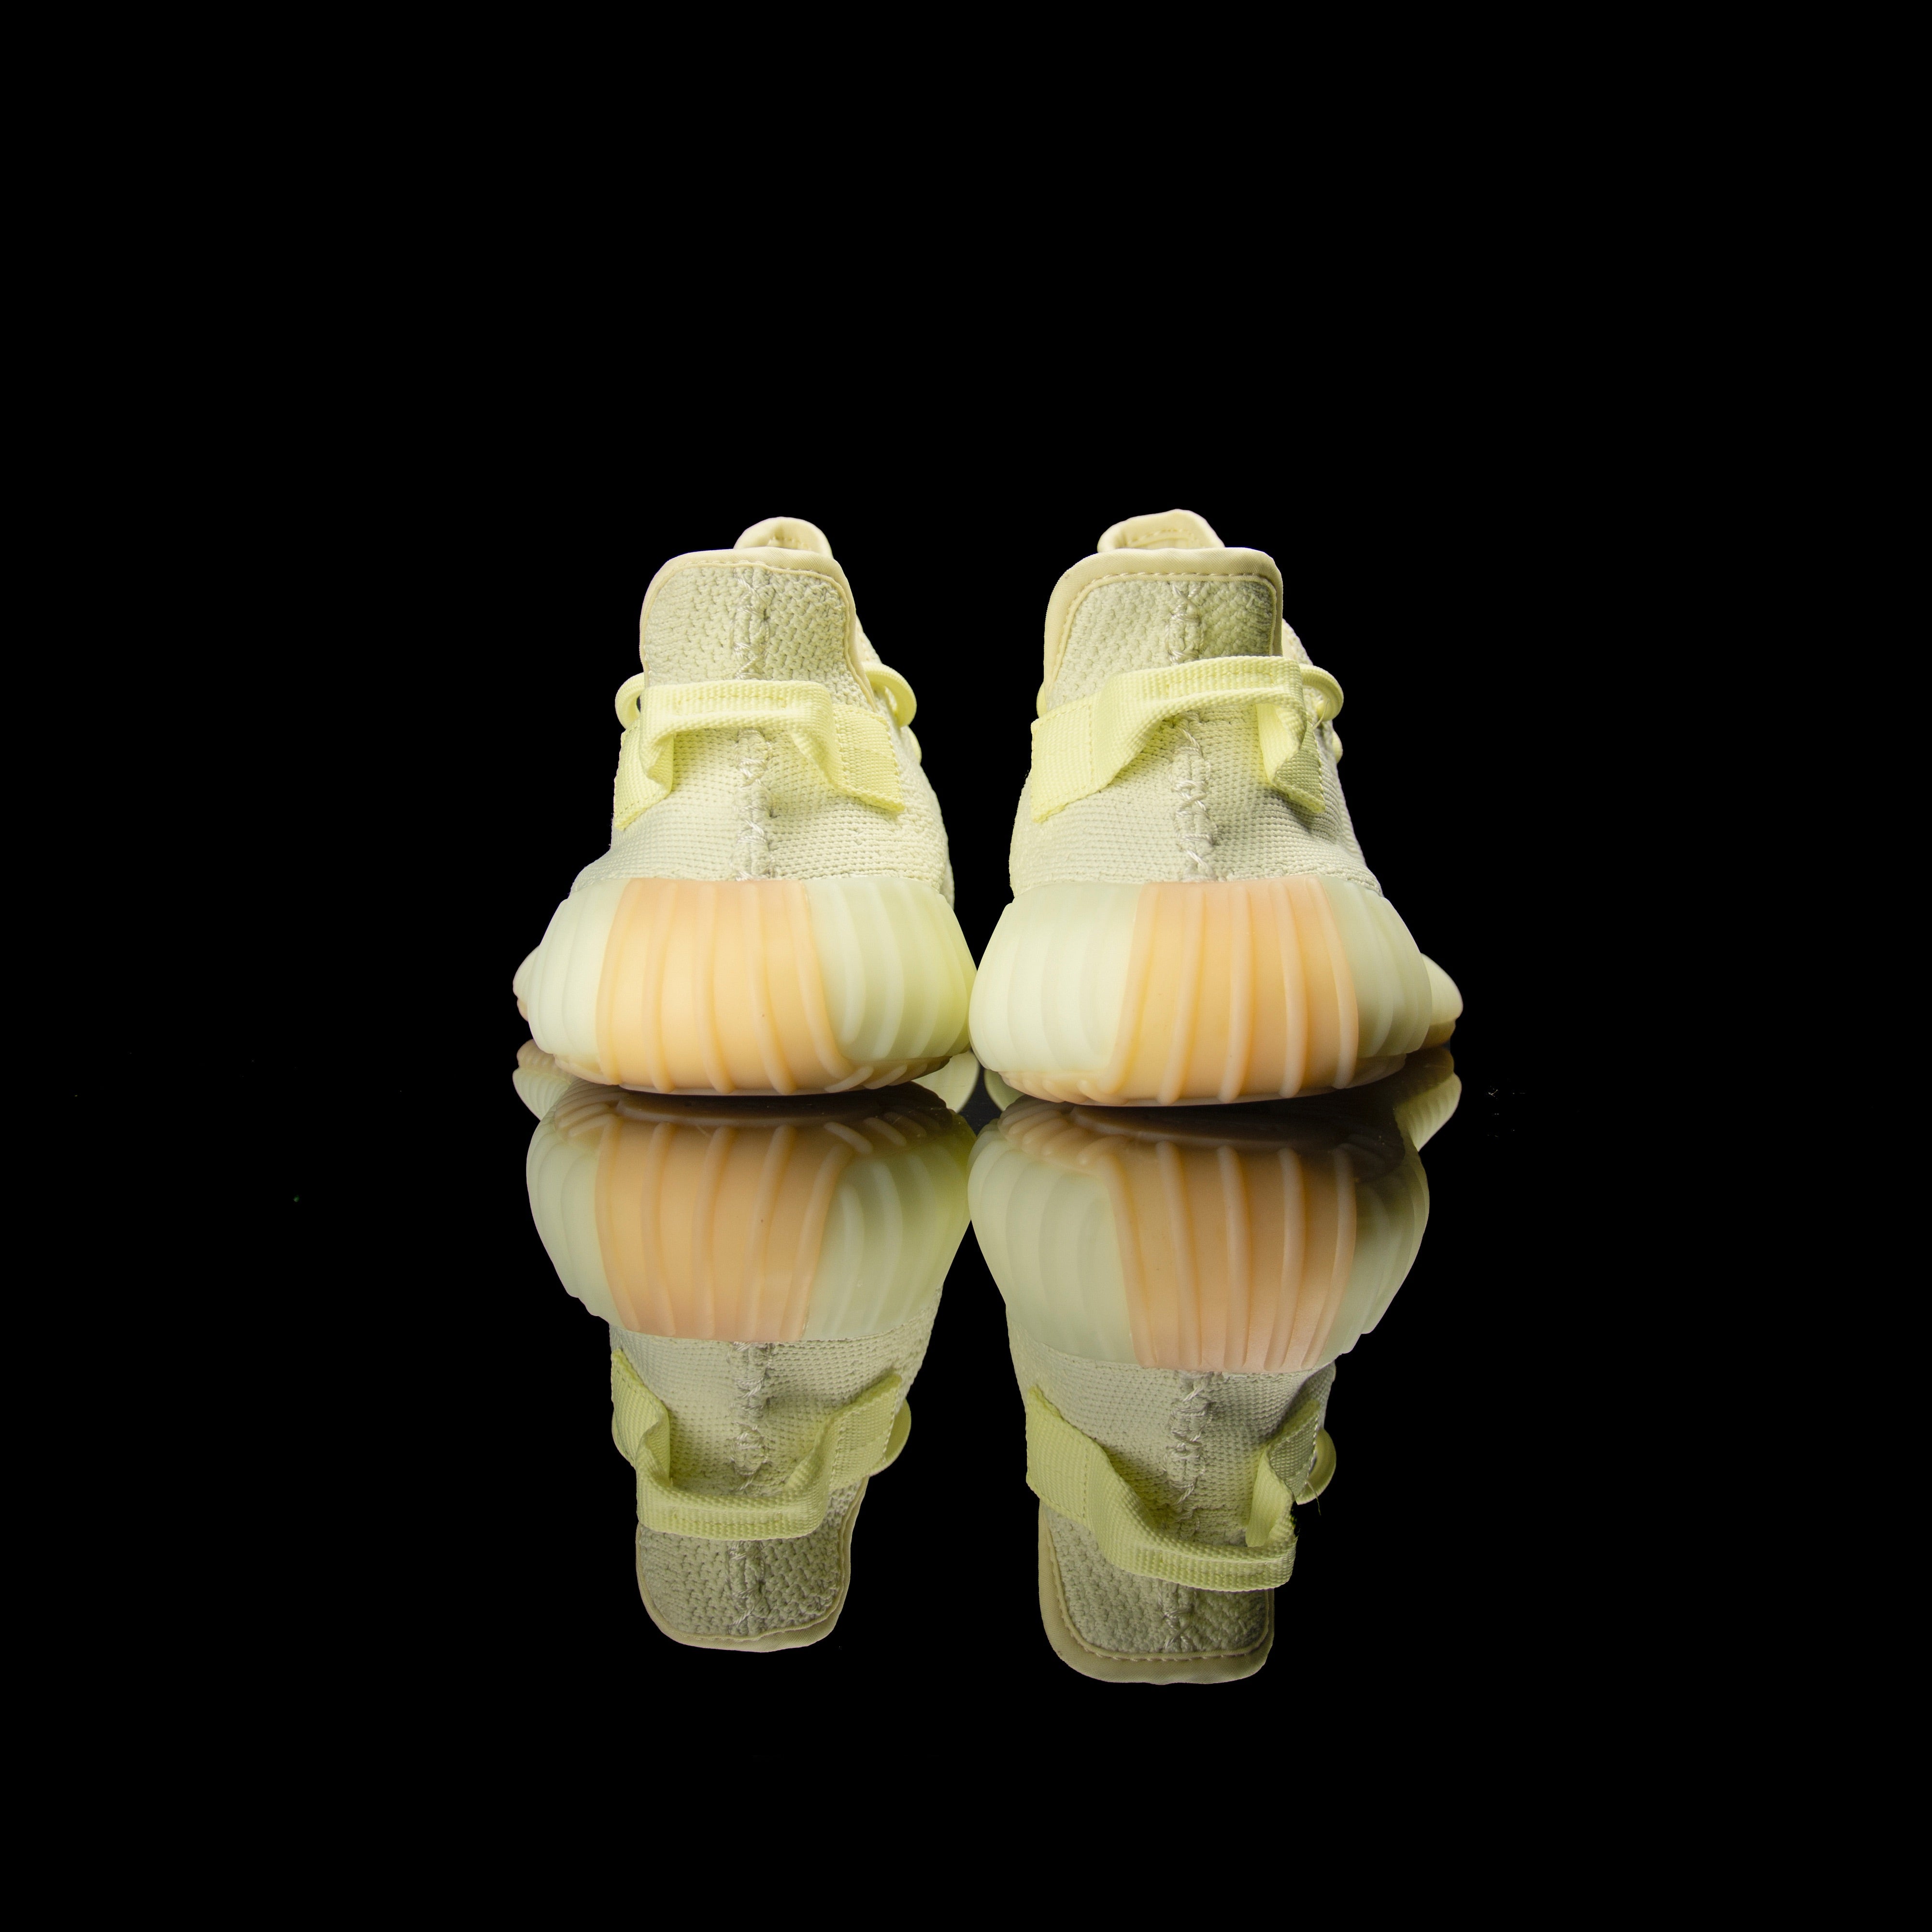 Adidas-Yeezy Boost 350-Product code: F36980 Colour: Butter/Butter/Butter Year of release: 2018-fabriqe.com